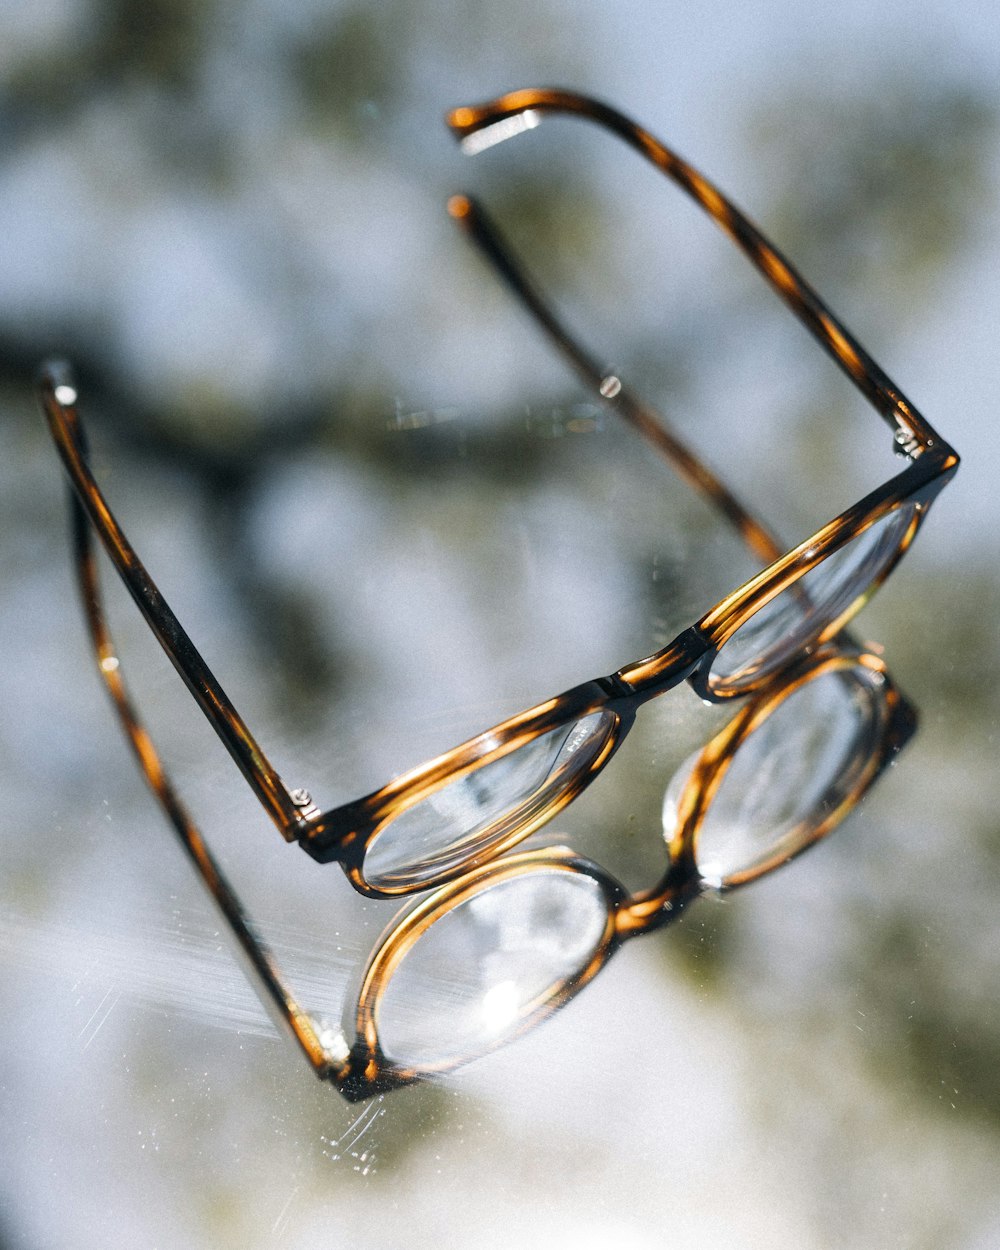 a pair of glasses sitting on top of a window sill